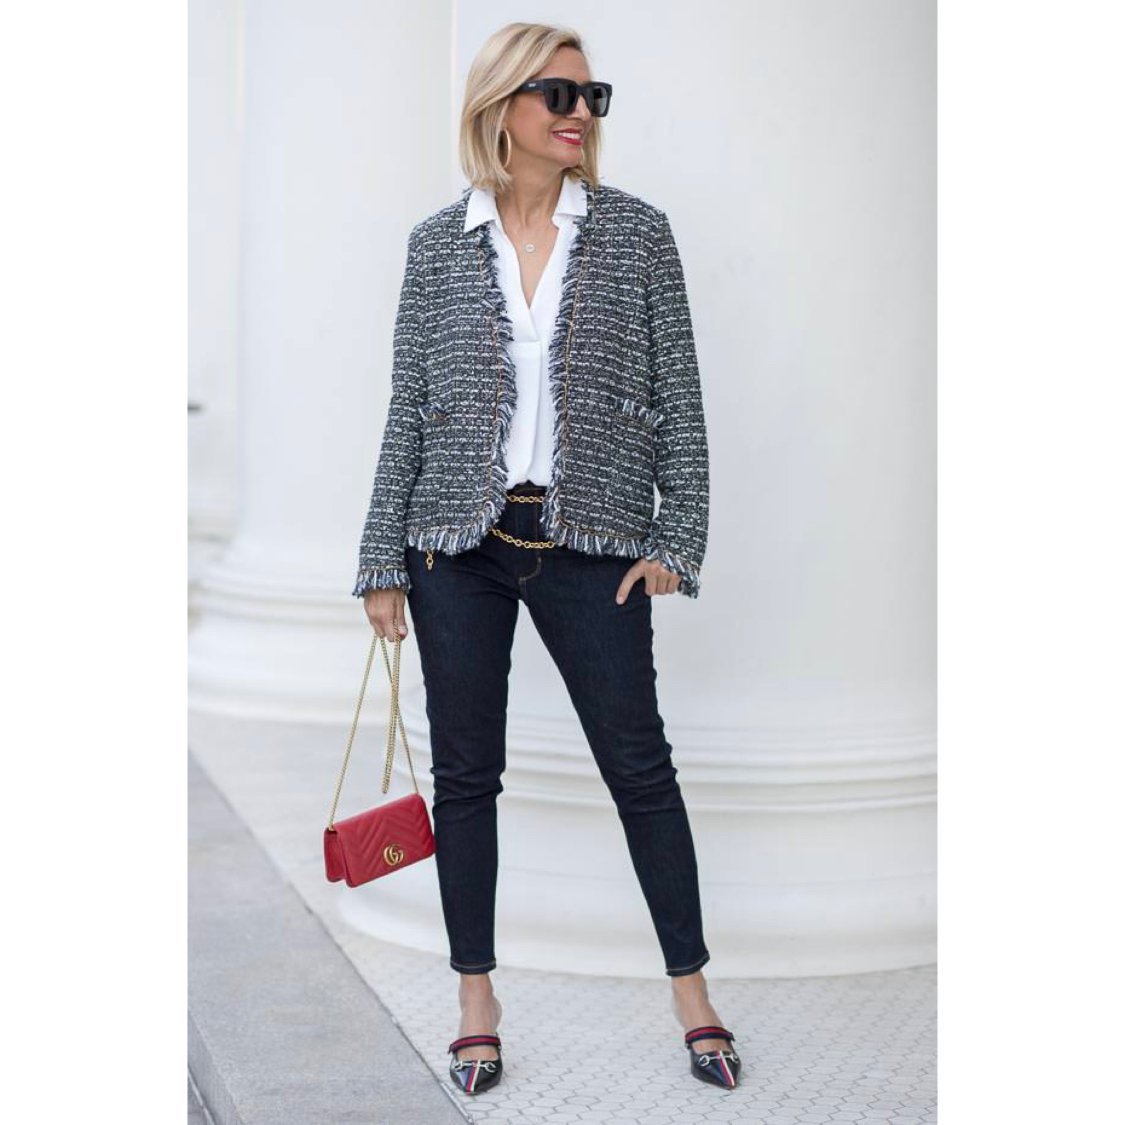 chanel tweed jacket outfit ideas